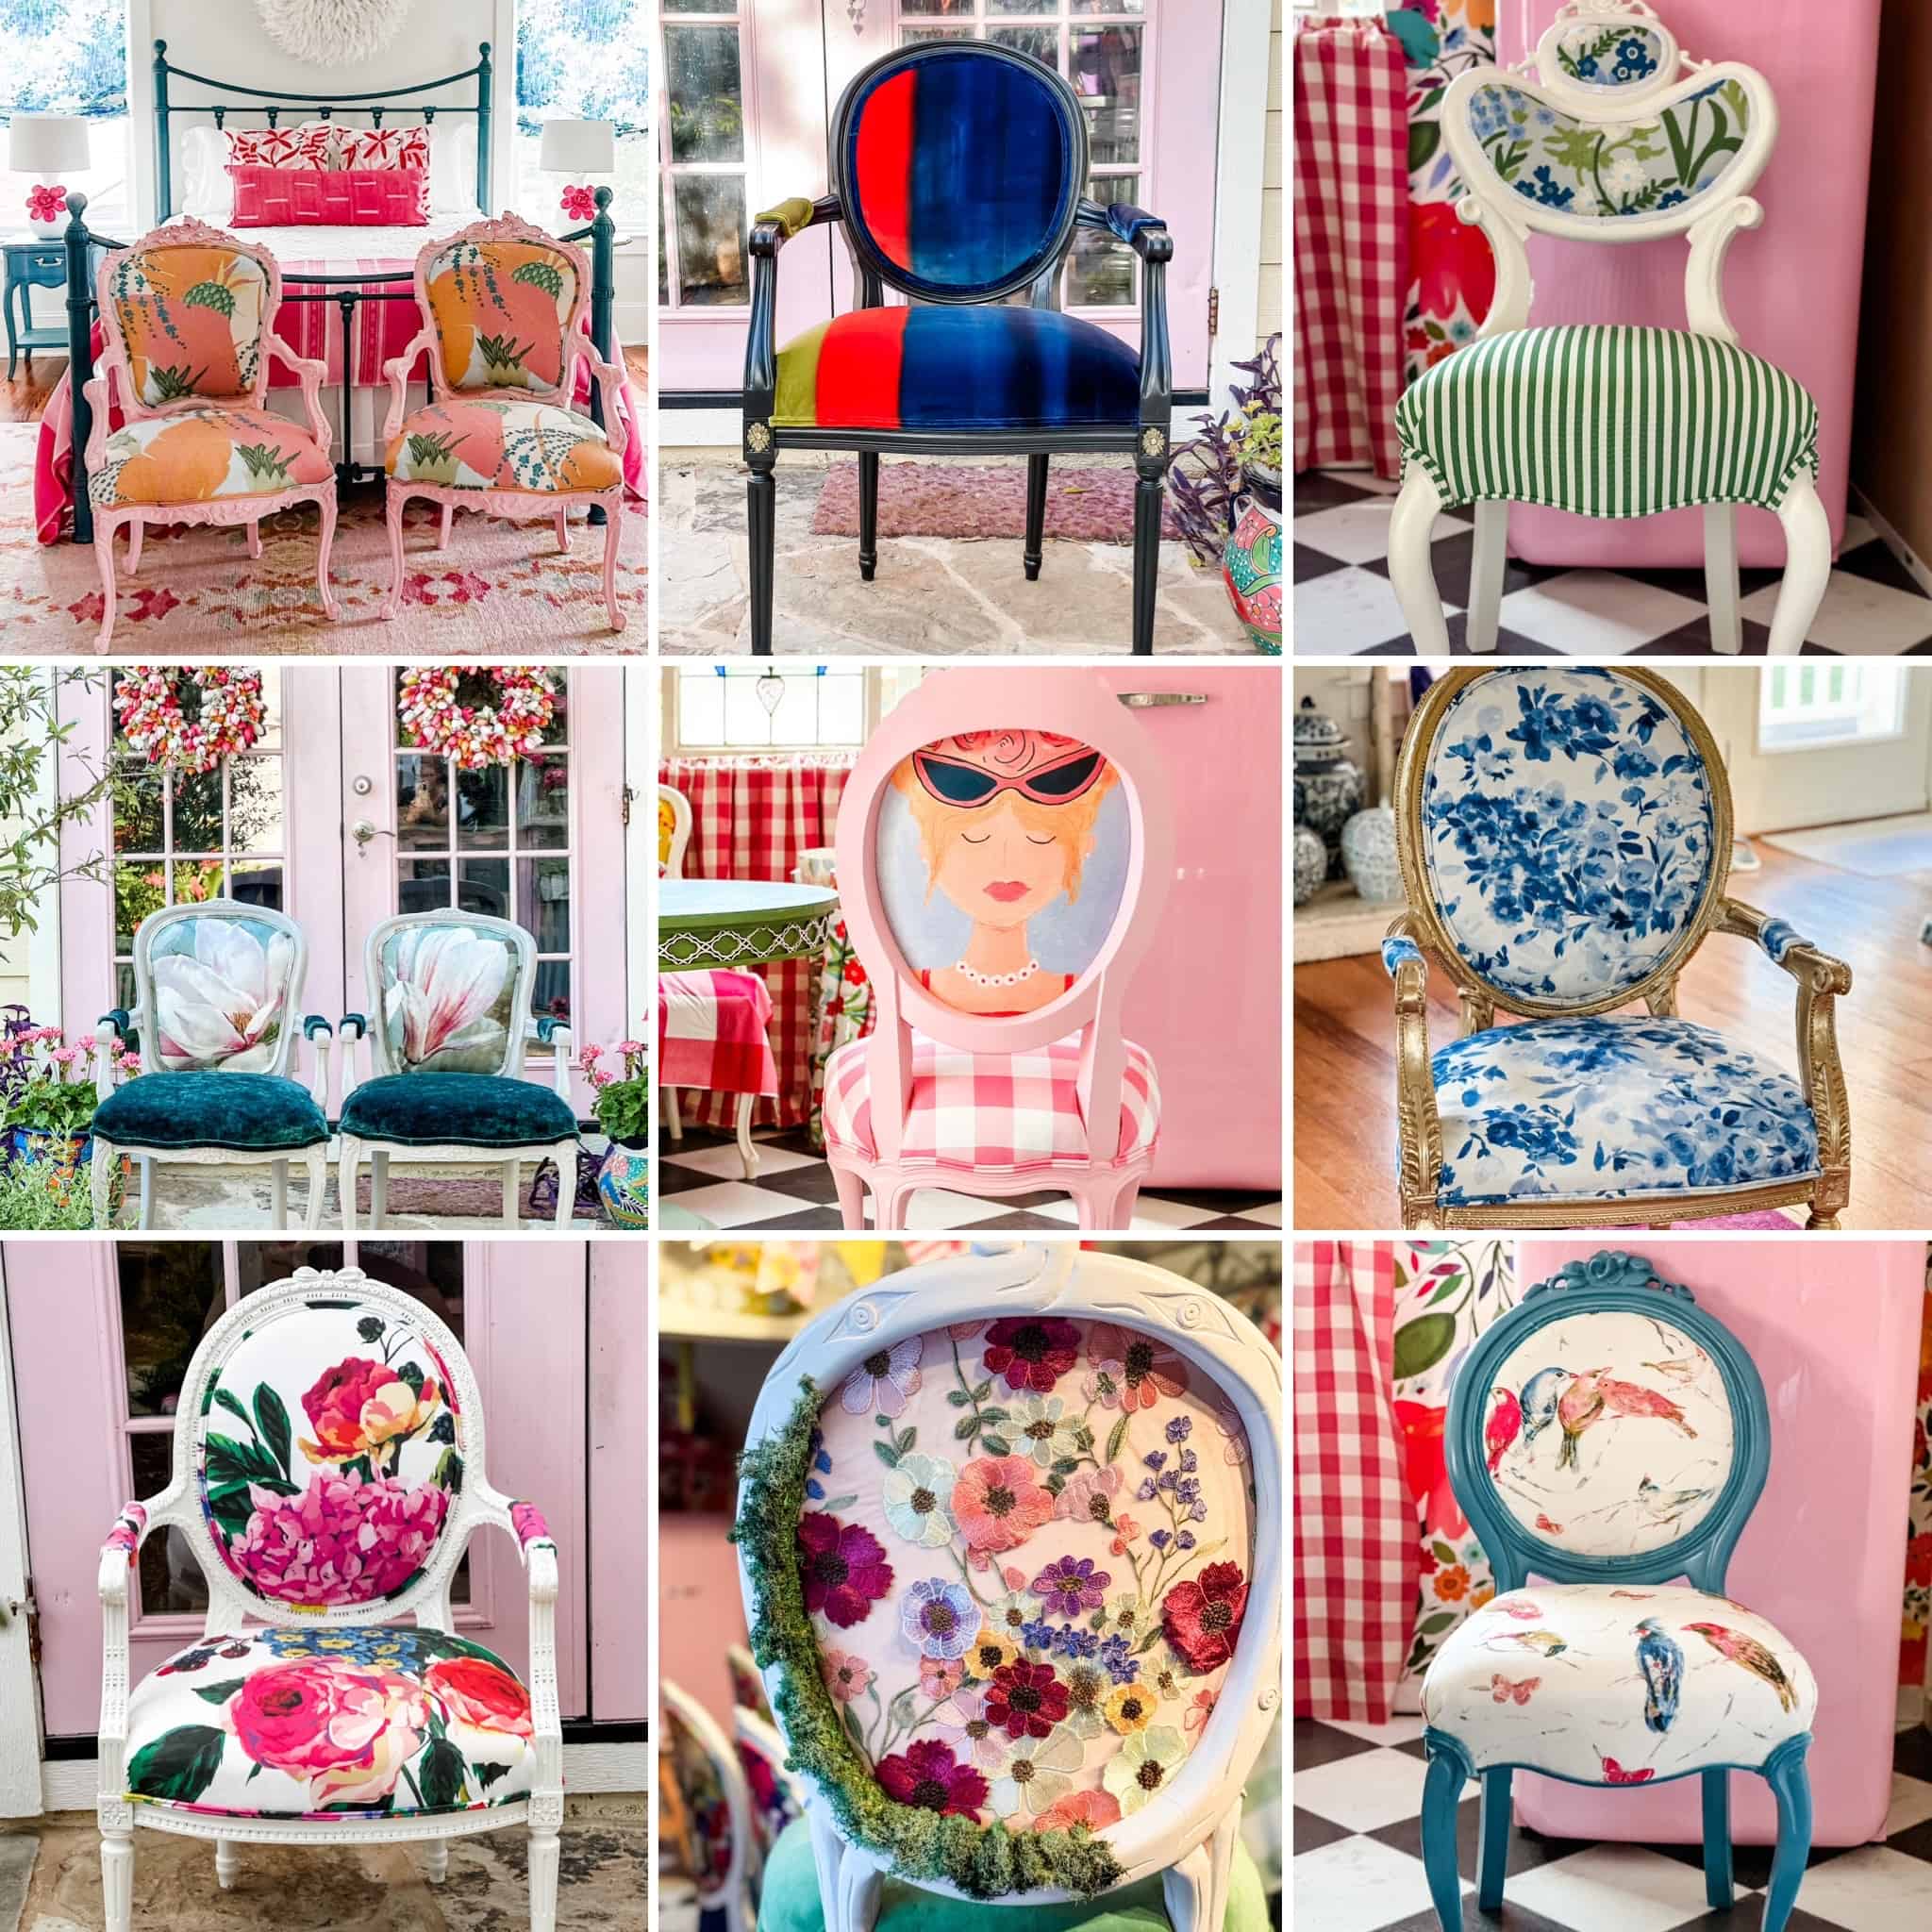 Original Fabrics Become Art for Chairs - Chair Whimsy